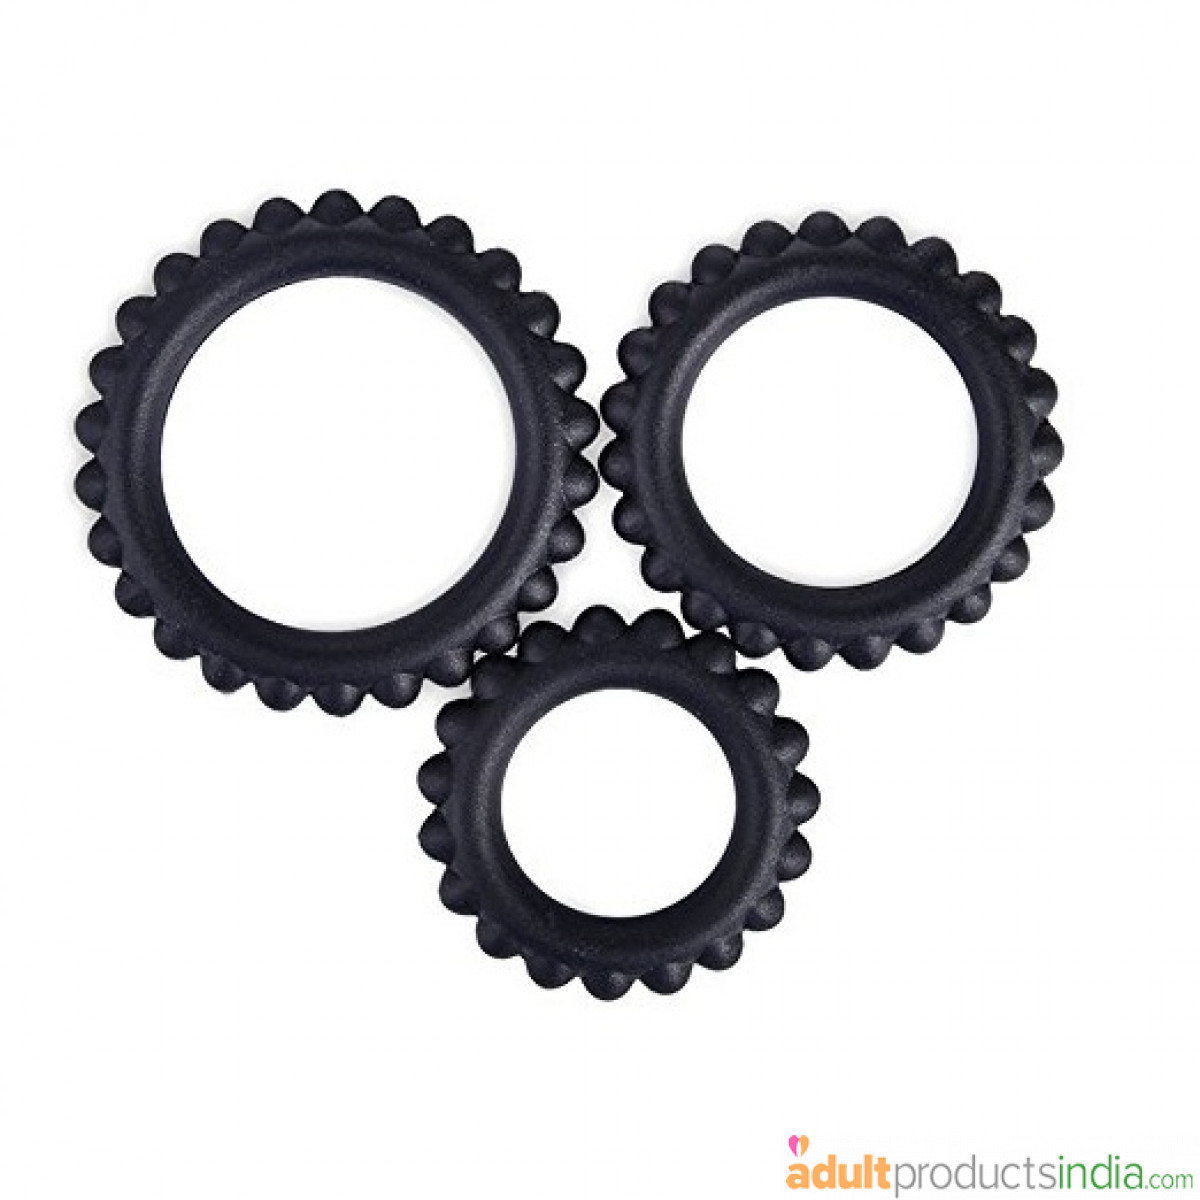 Reusable 3 Size Silicone Cock Rings - Black